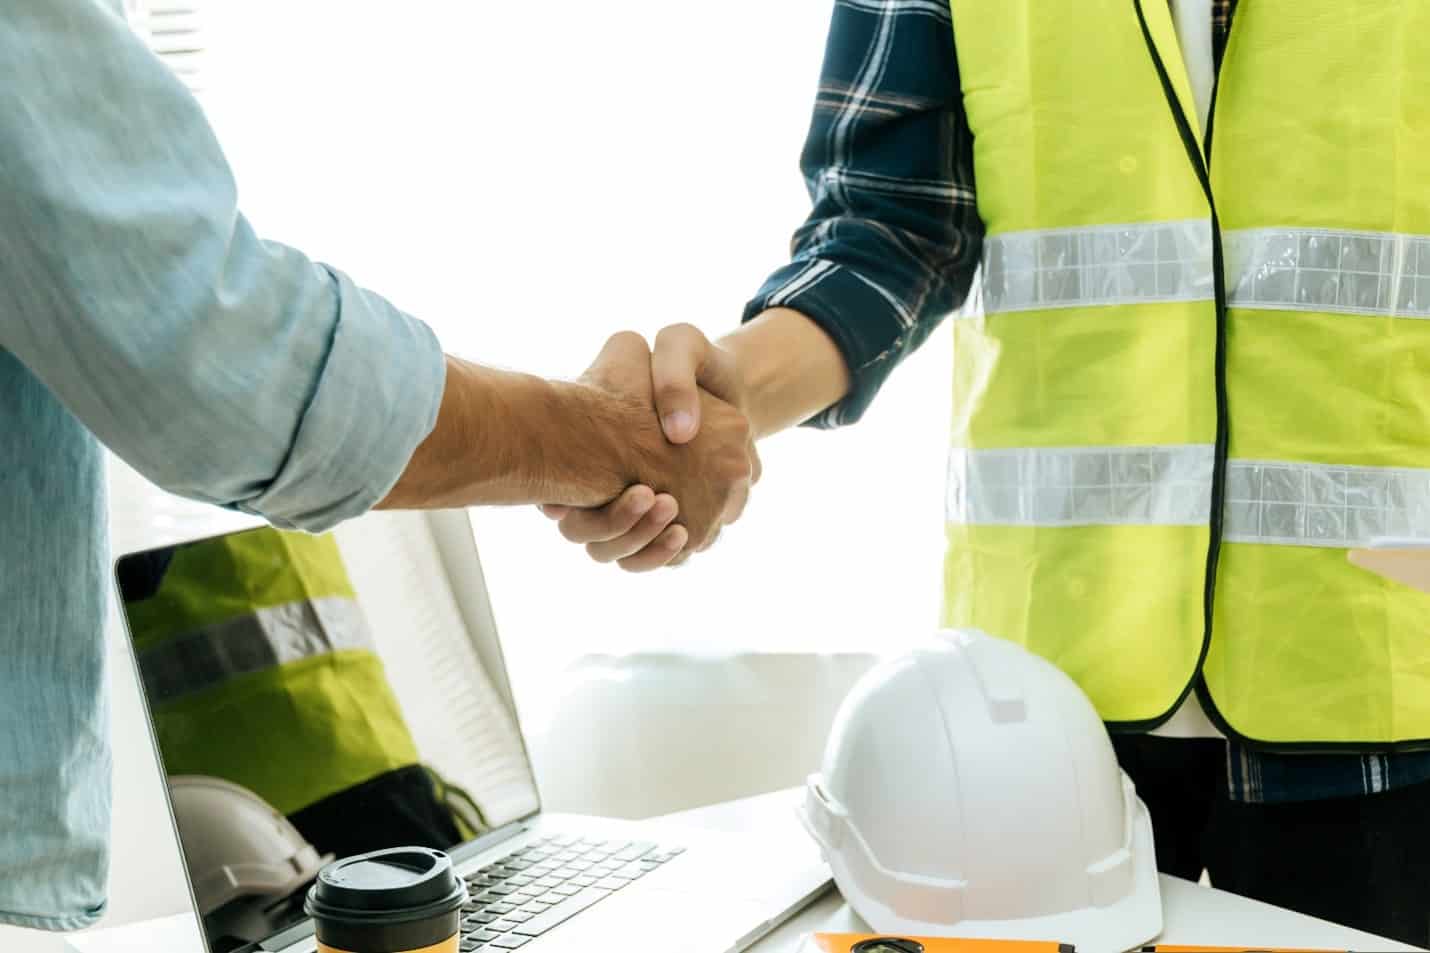 Boss and worker shaking hand